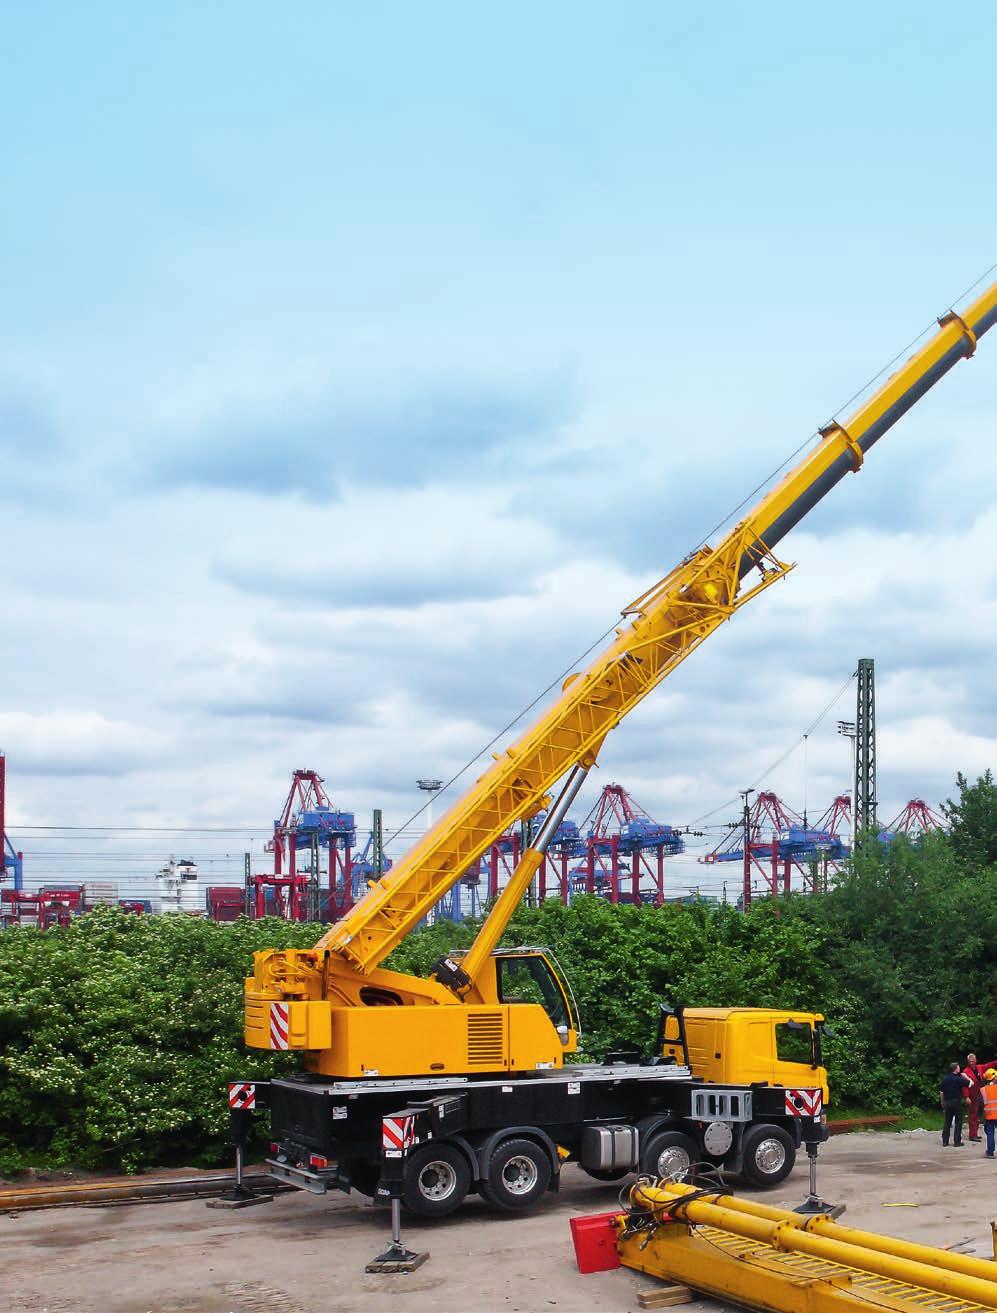 Truck mounted telescopic crane LTF 1060-4.1 Economical and flexible With a long telescopic boom and high capacities the compact truck mounted telescopic crane LTF 1060-4.